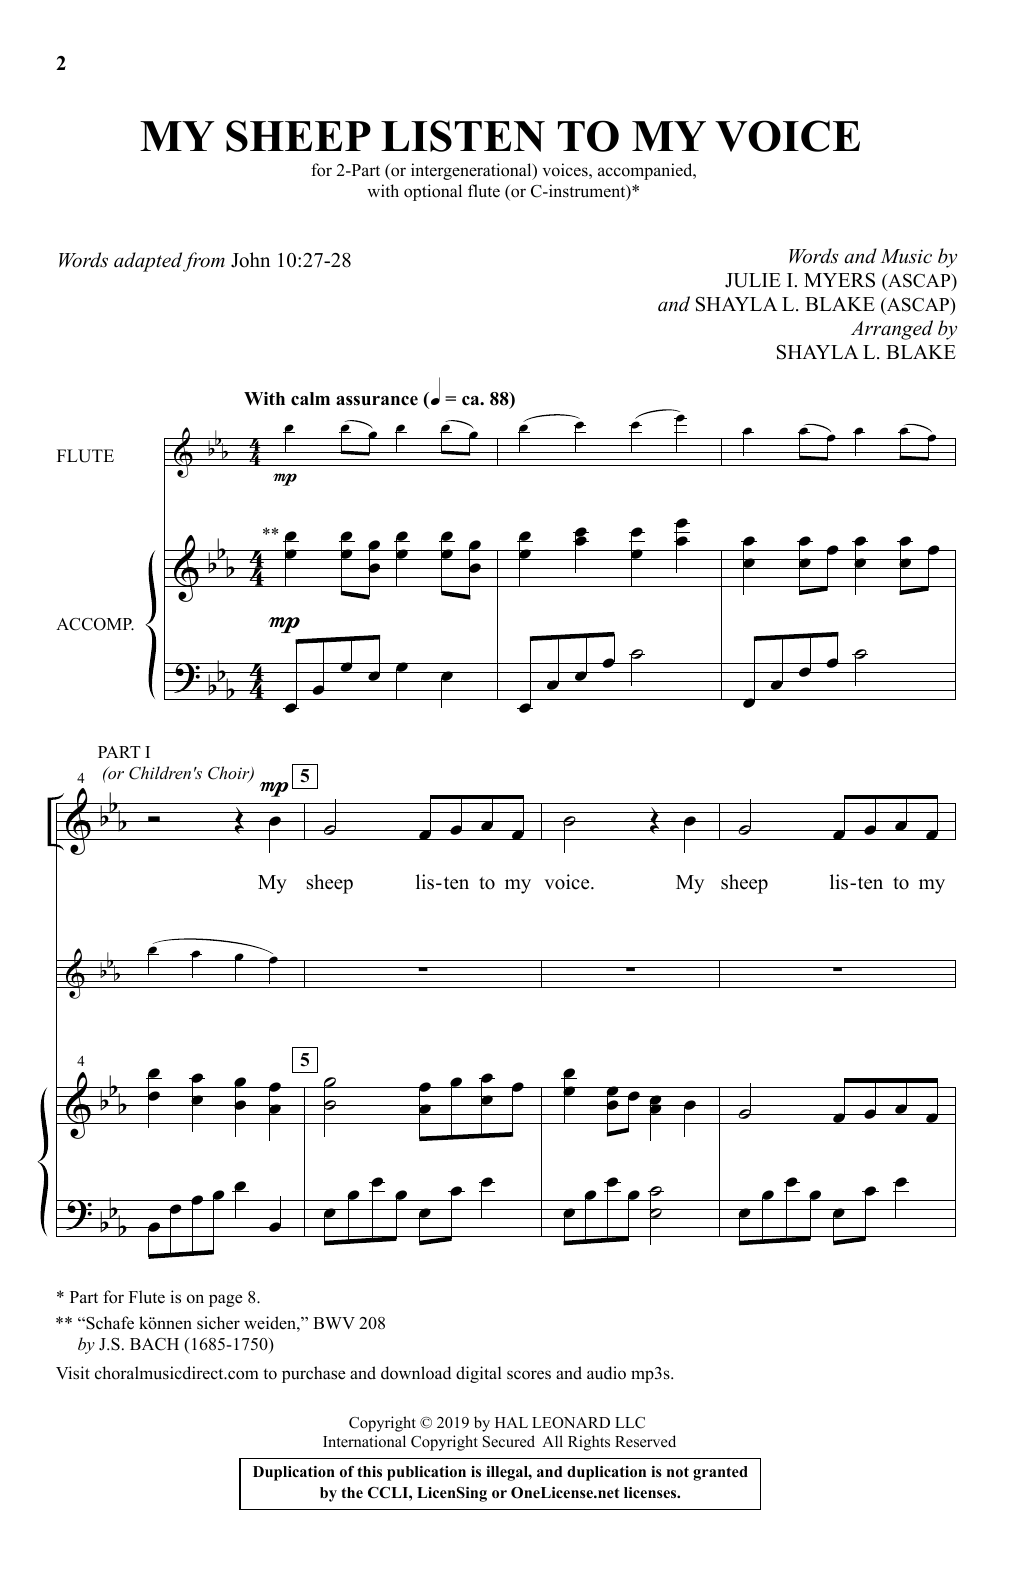 Download Julie I. Myers and Shayla L. Blake My Sheep Listen To My Voice (arr. Shayl Sheet Music